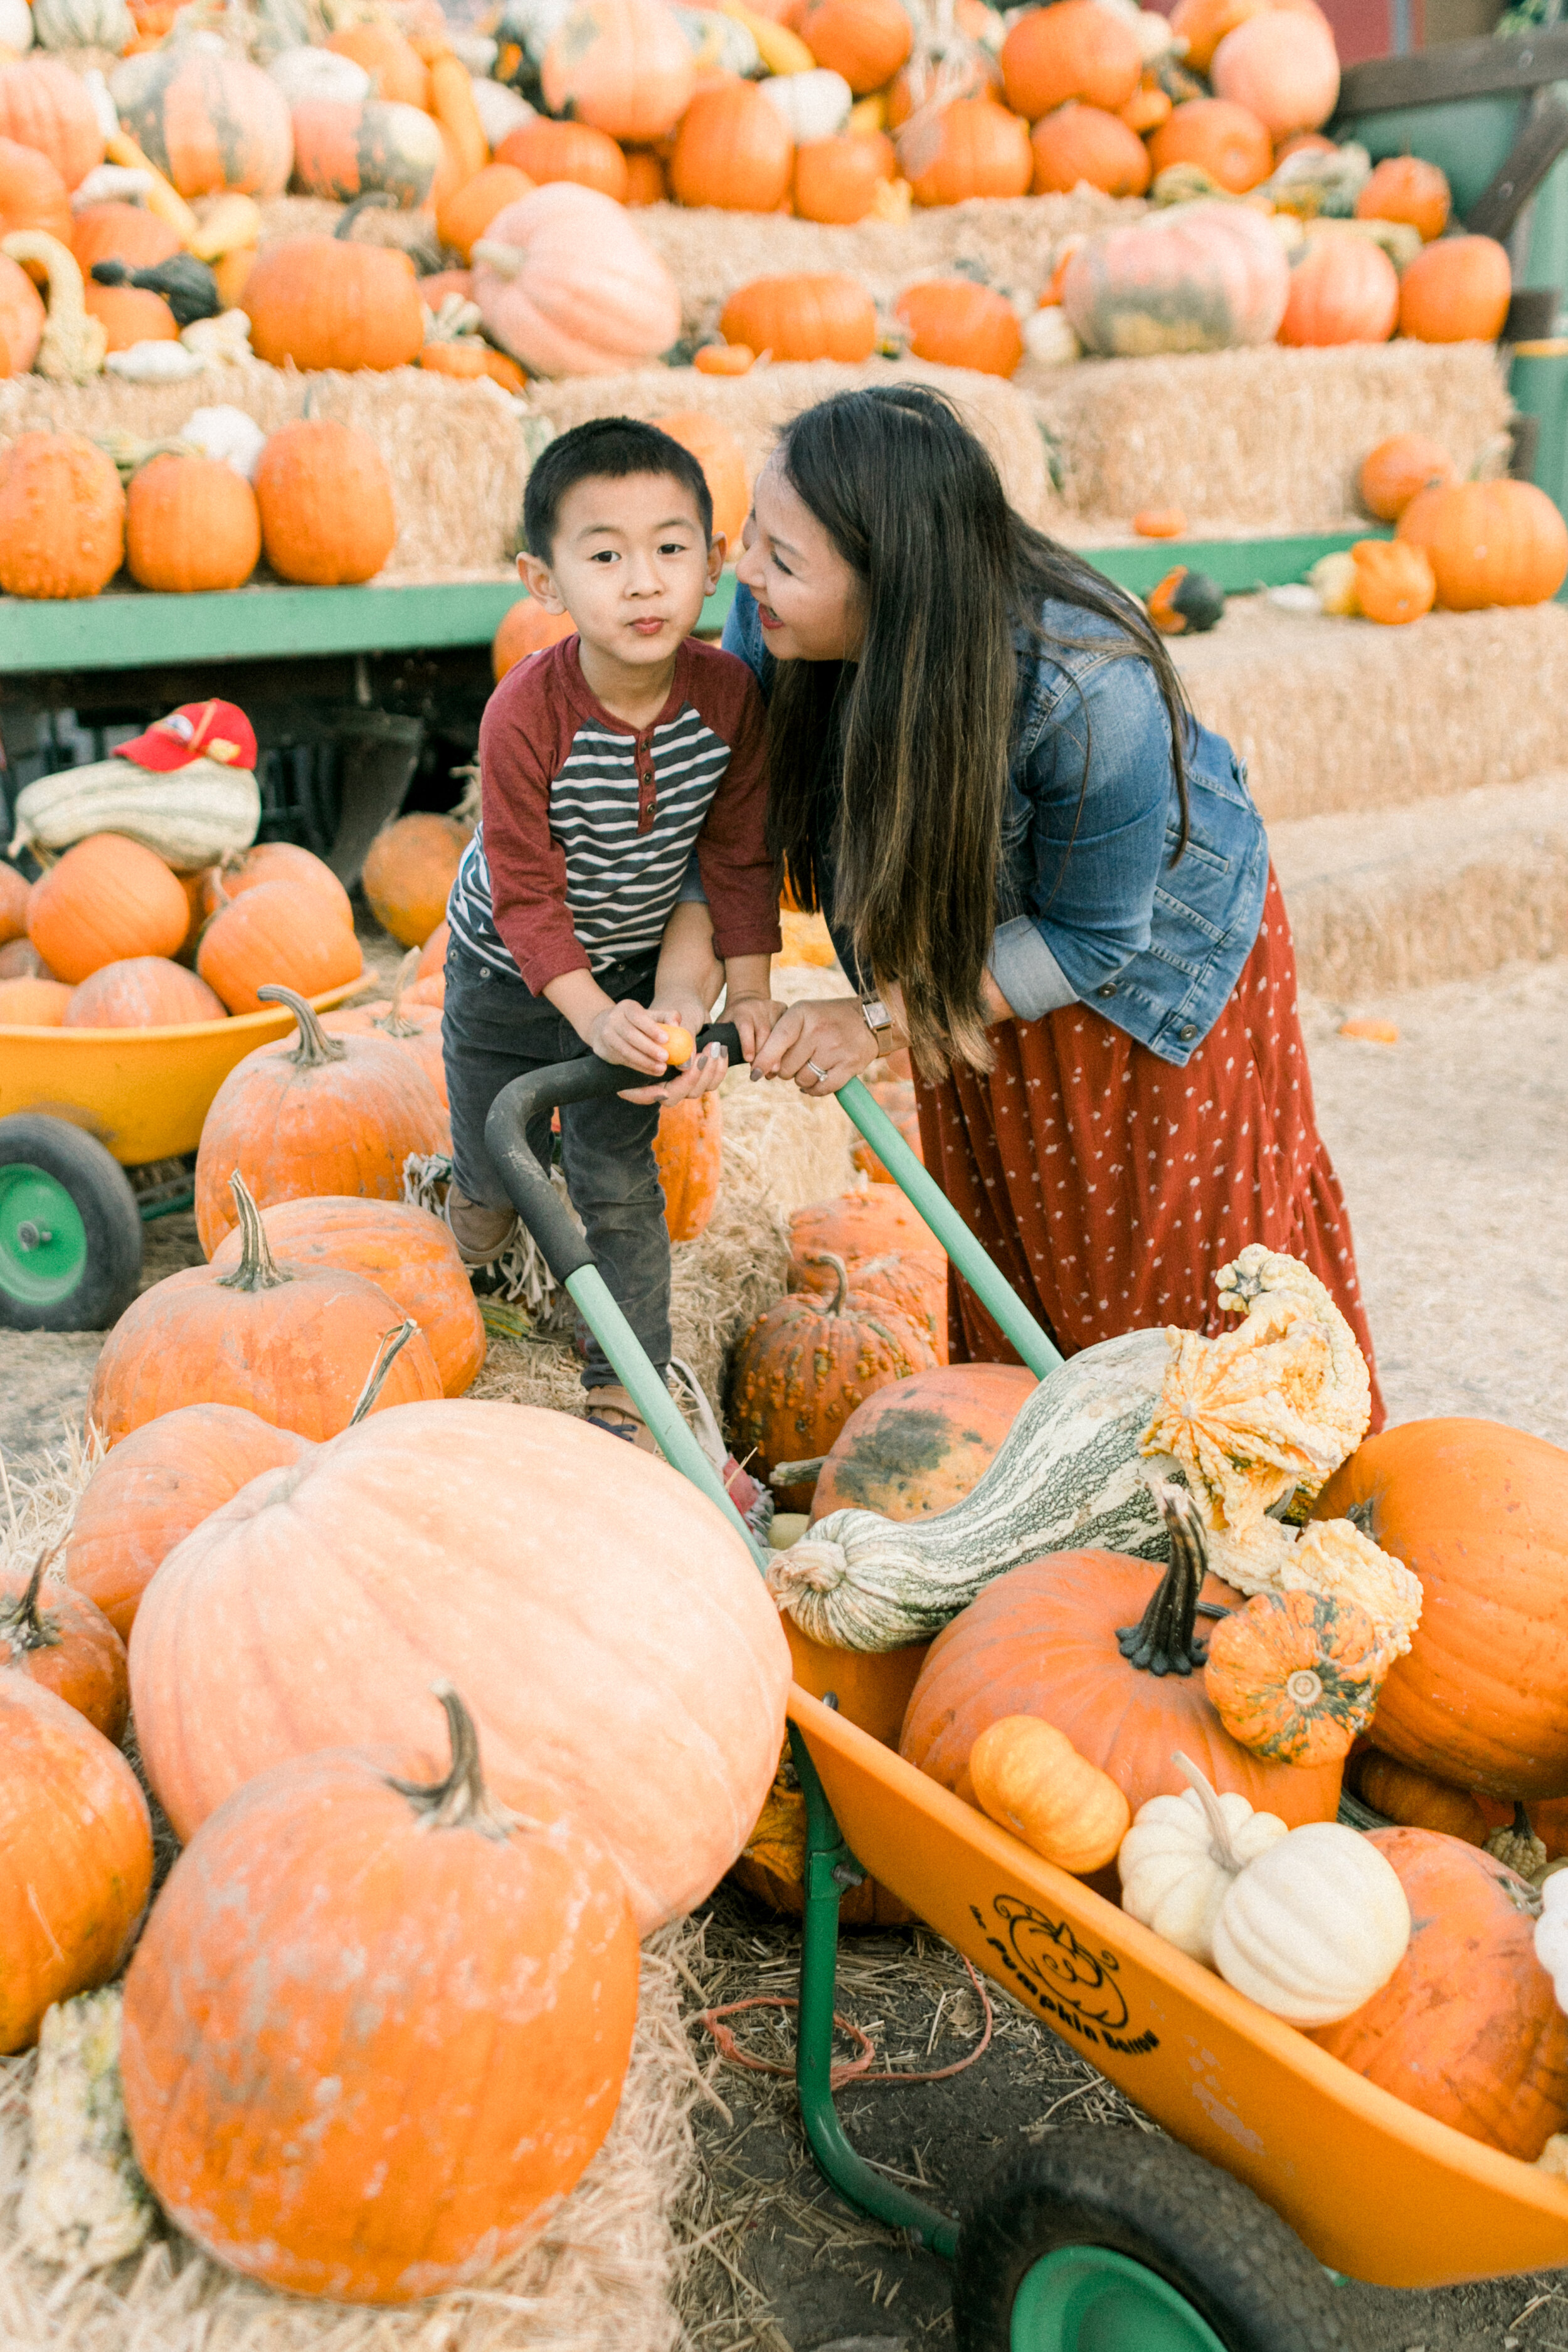  Pumpkins Patch Fun for Everyone on Hello Rascal Kids. Family lifestyle blog for parents and kids. 